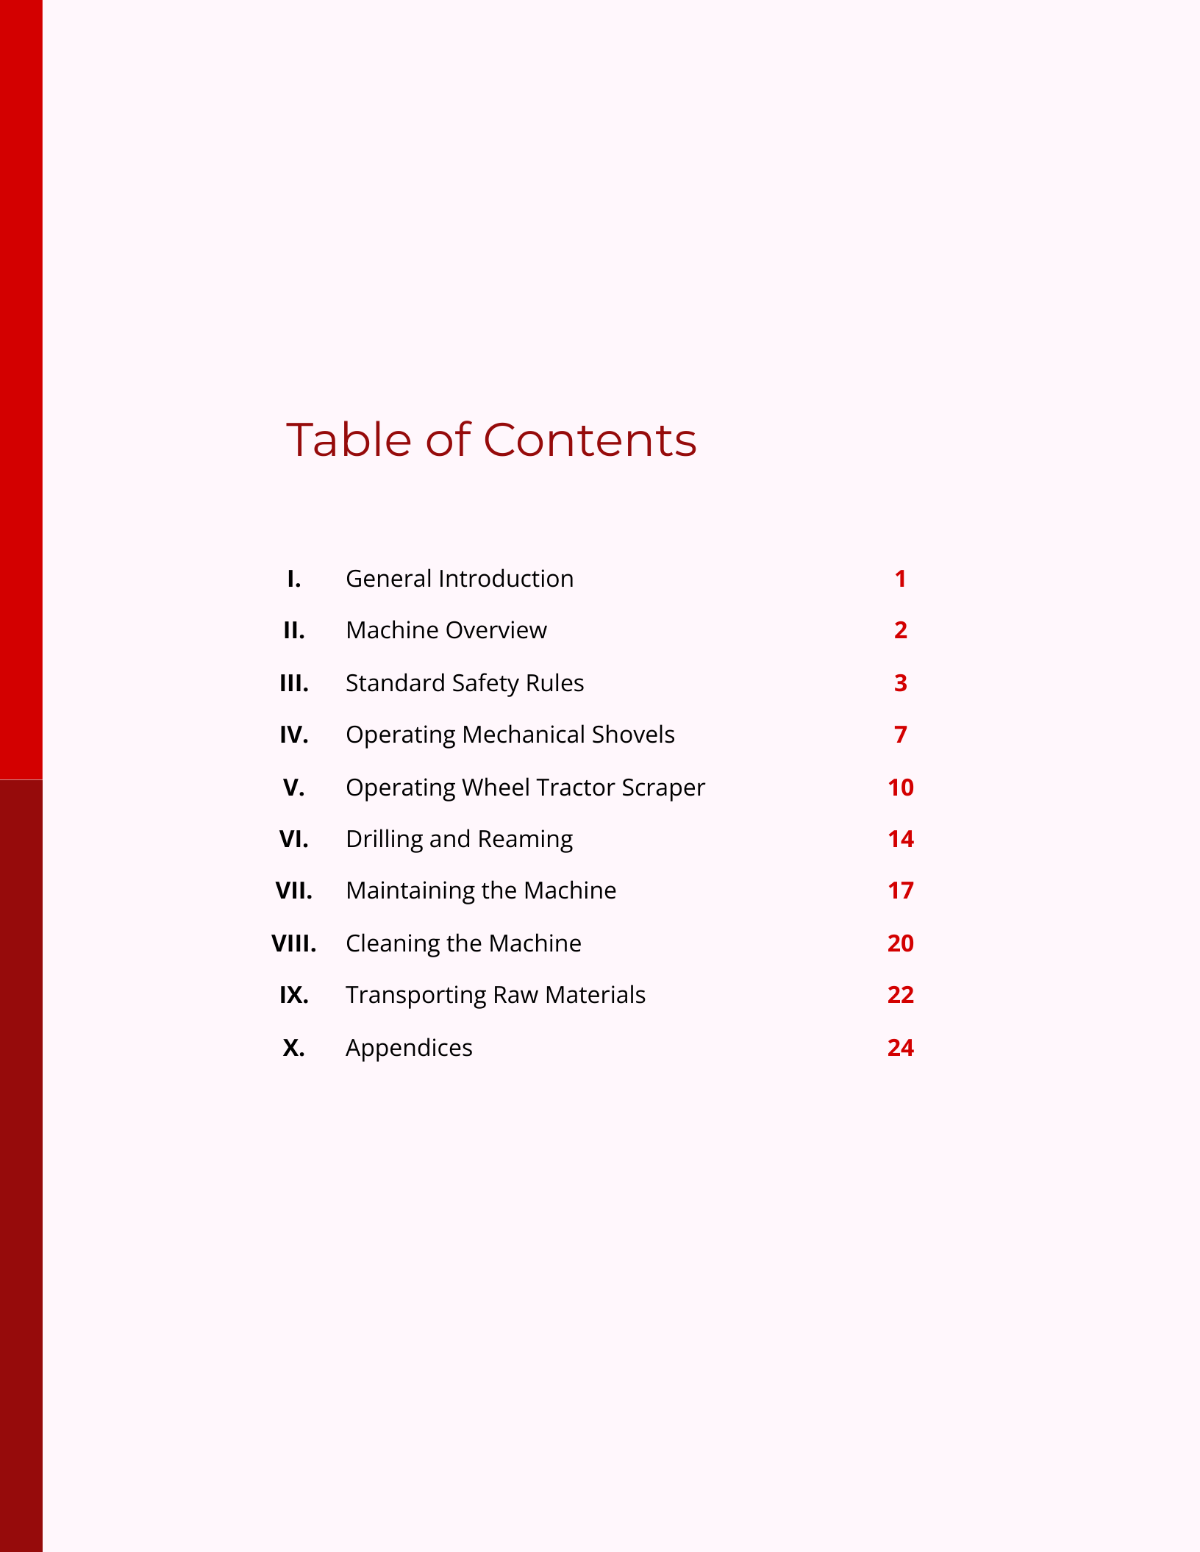 SOP Table of Contents Template